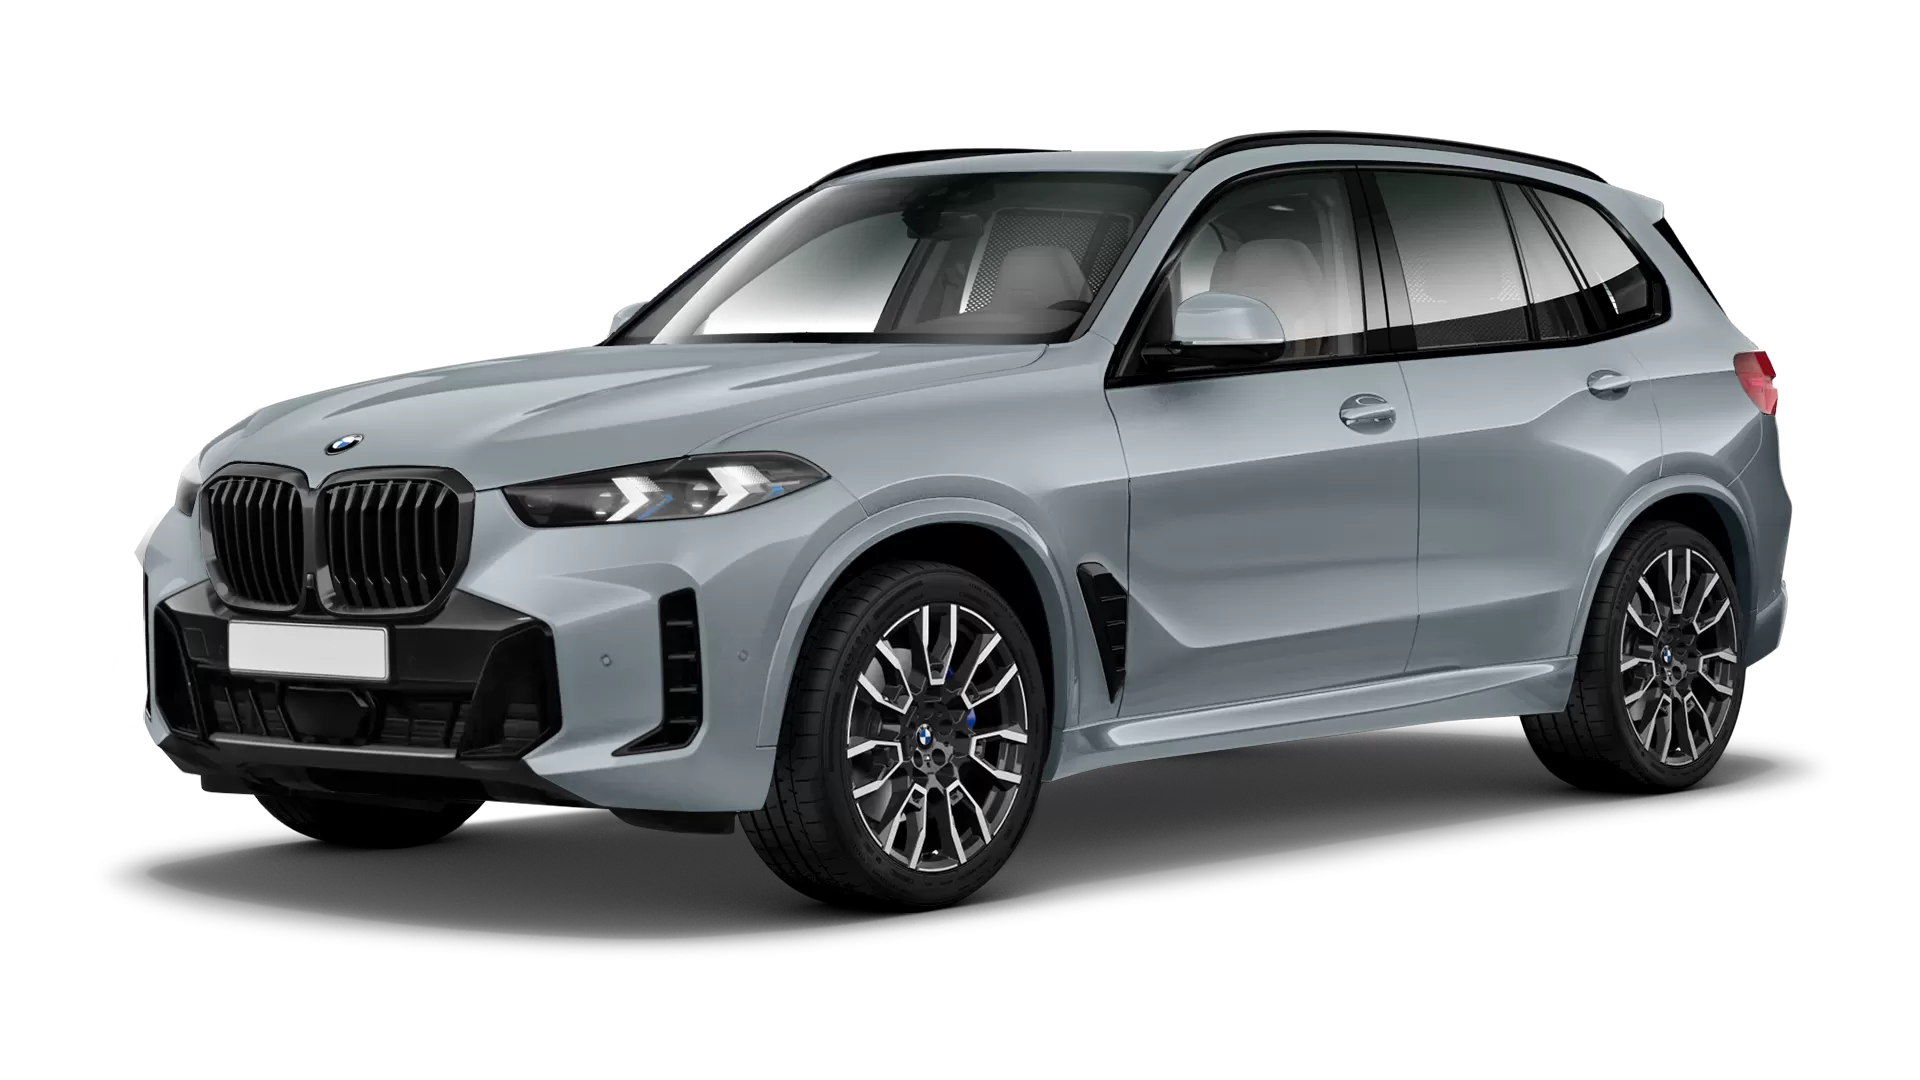 BMW X5 G05 LCI Facelift stock front view in Frozen Pure Grey color